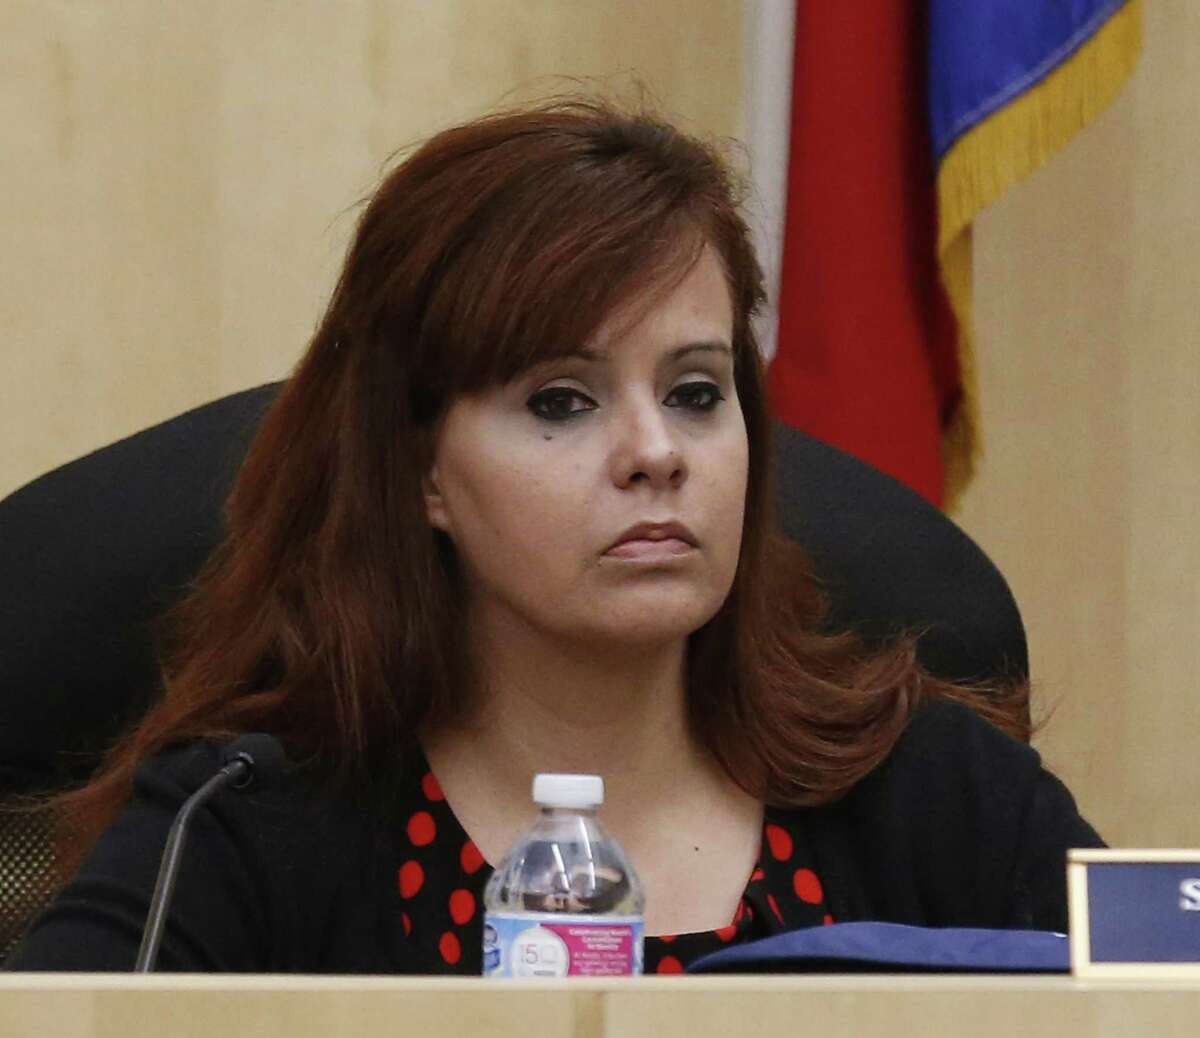 Stacey Alderete, then Stacey Estrada, a South San Independent School District trustee, attends a school board meeting in 2016. (Kin Man Hui/San Antonio Express-News)